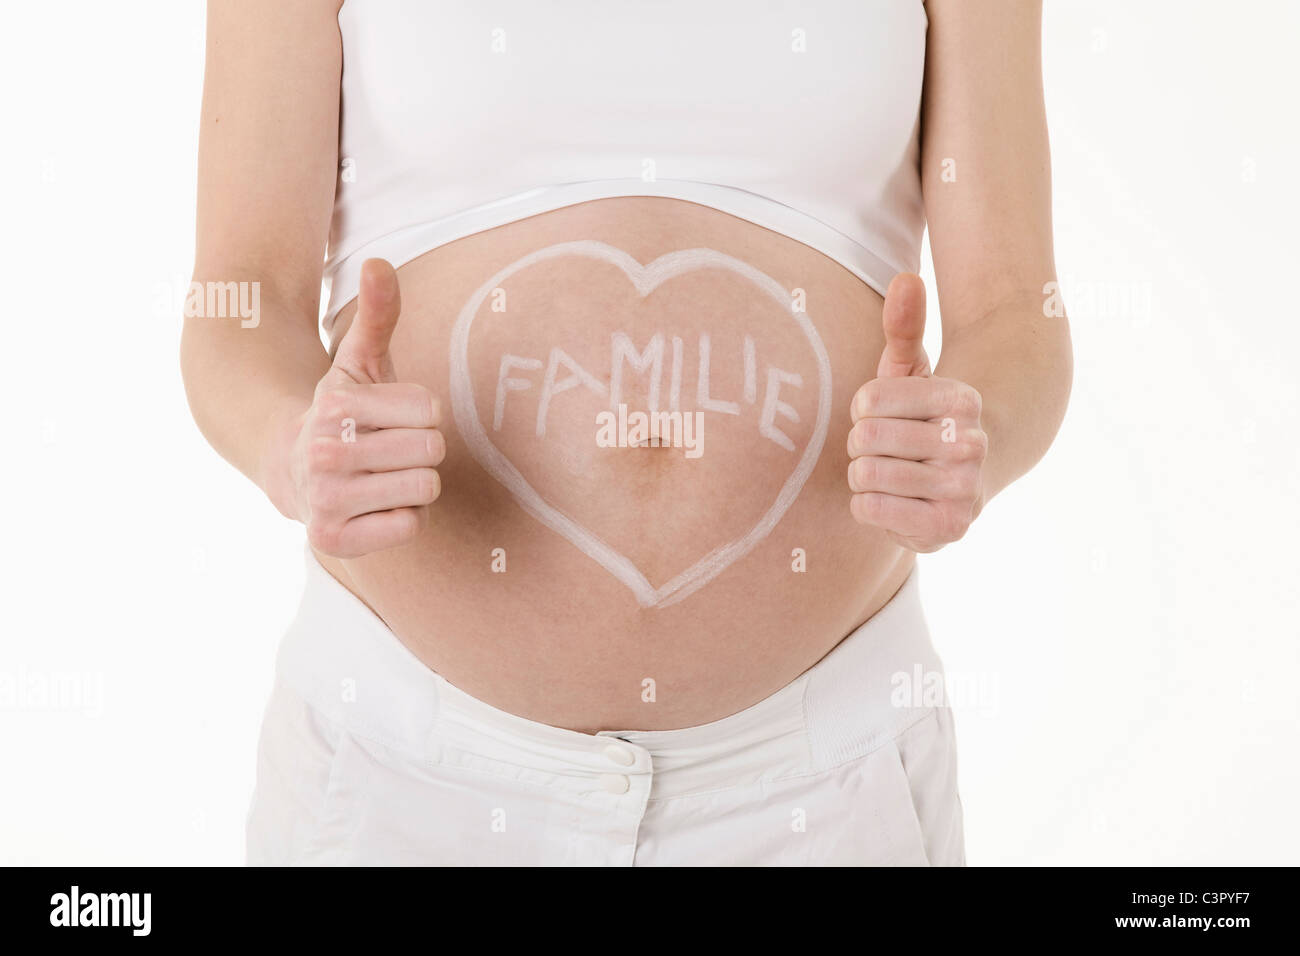 Heart shape drawn on pregnant woman's belly with text, showing thumbs up sign Stock Photo